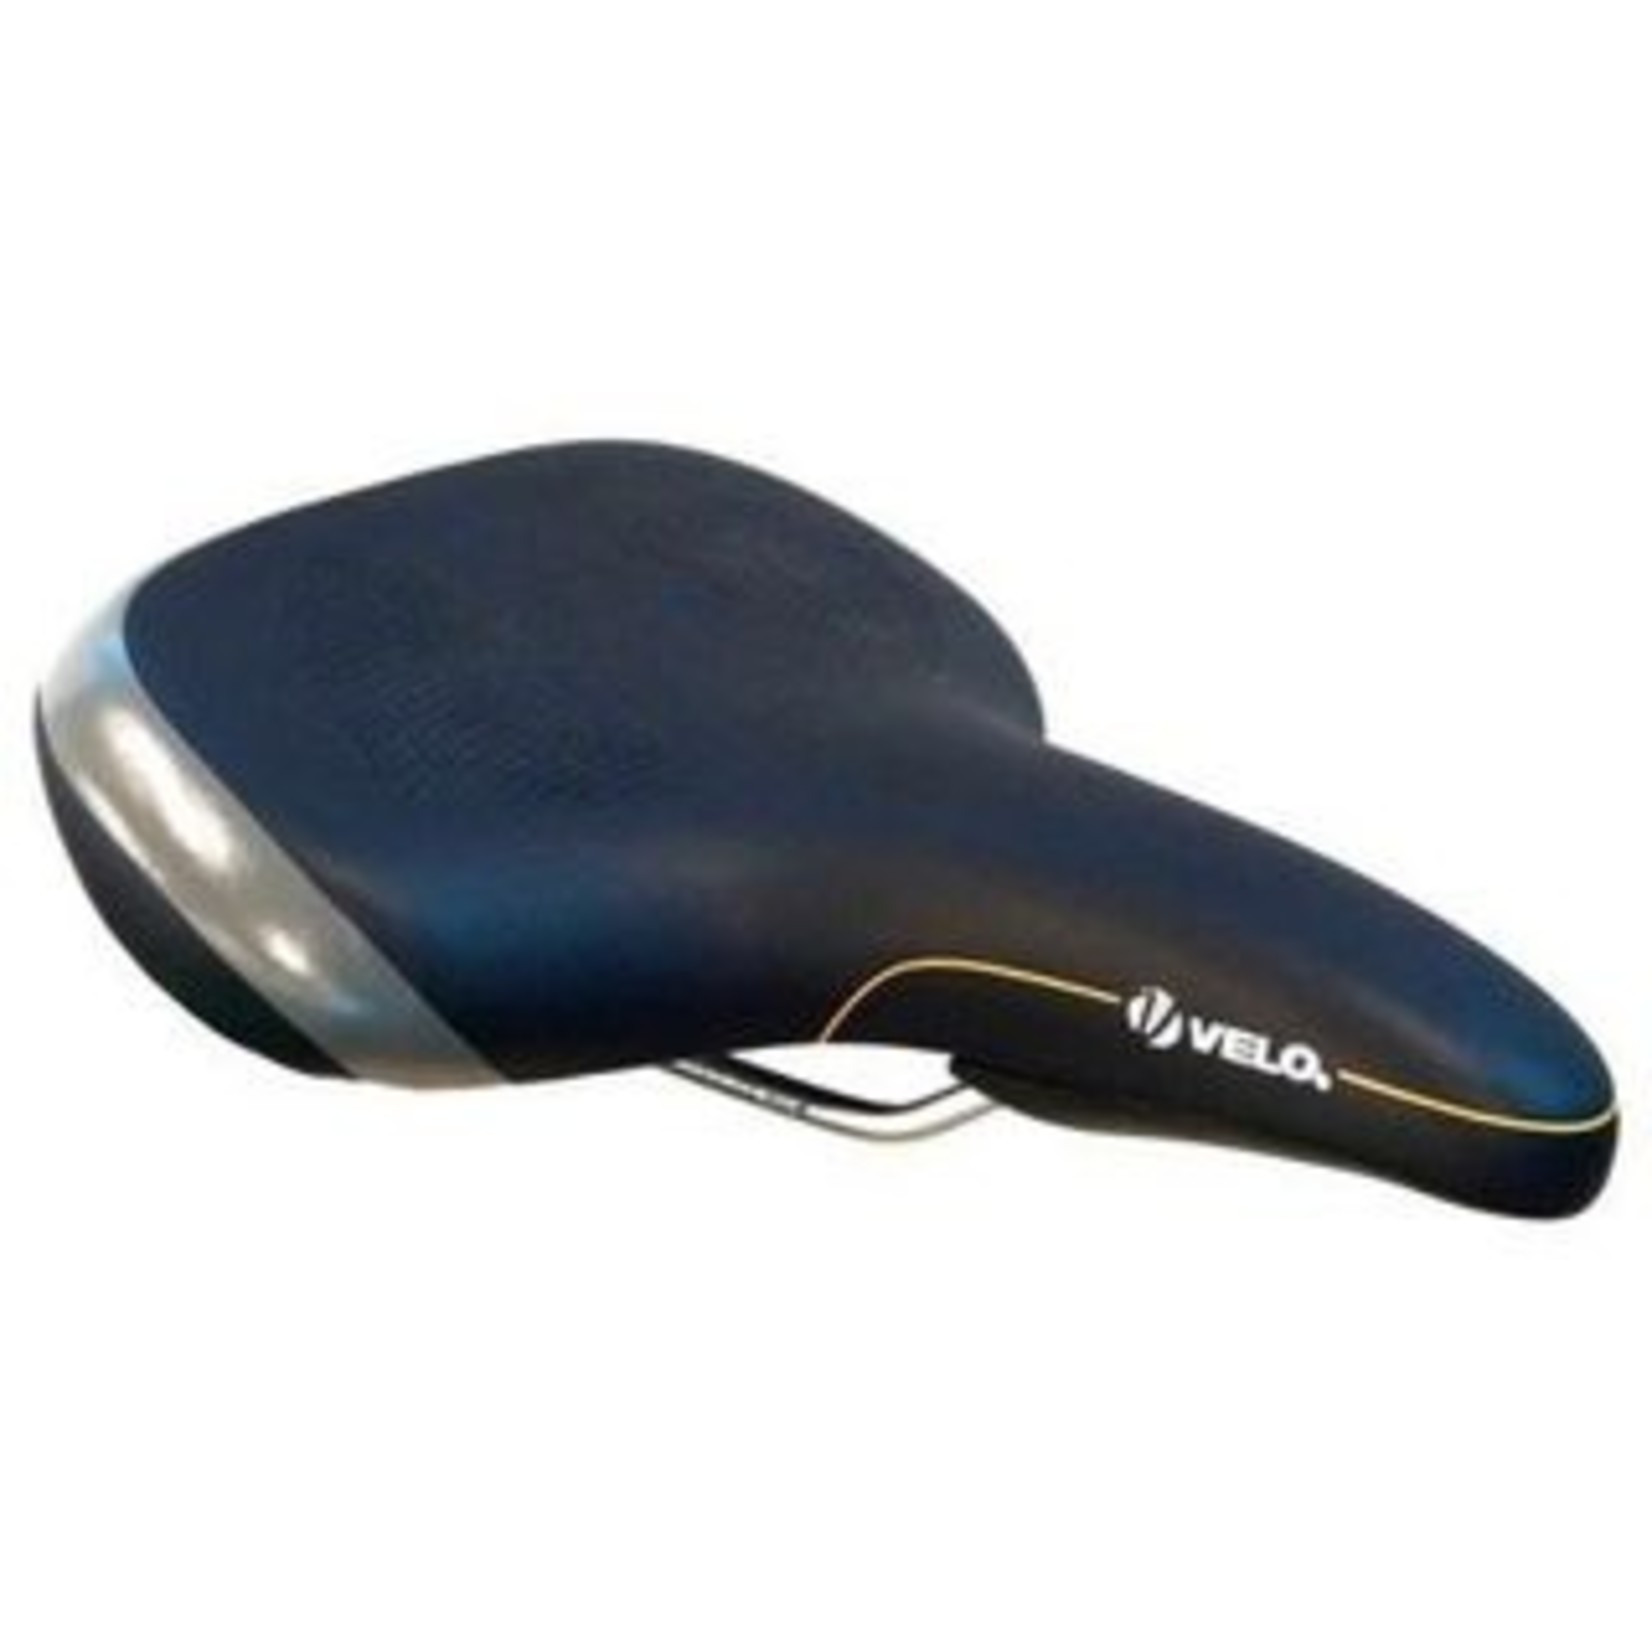 Velo Velo - Bike/Cycling Saddle For E-Bike With Handle And Protective Bumper - Black